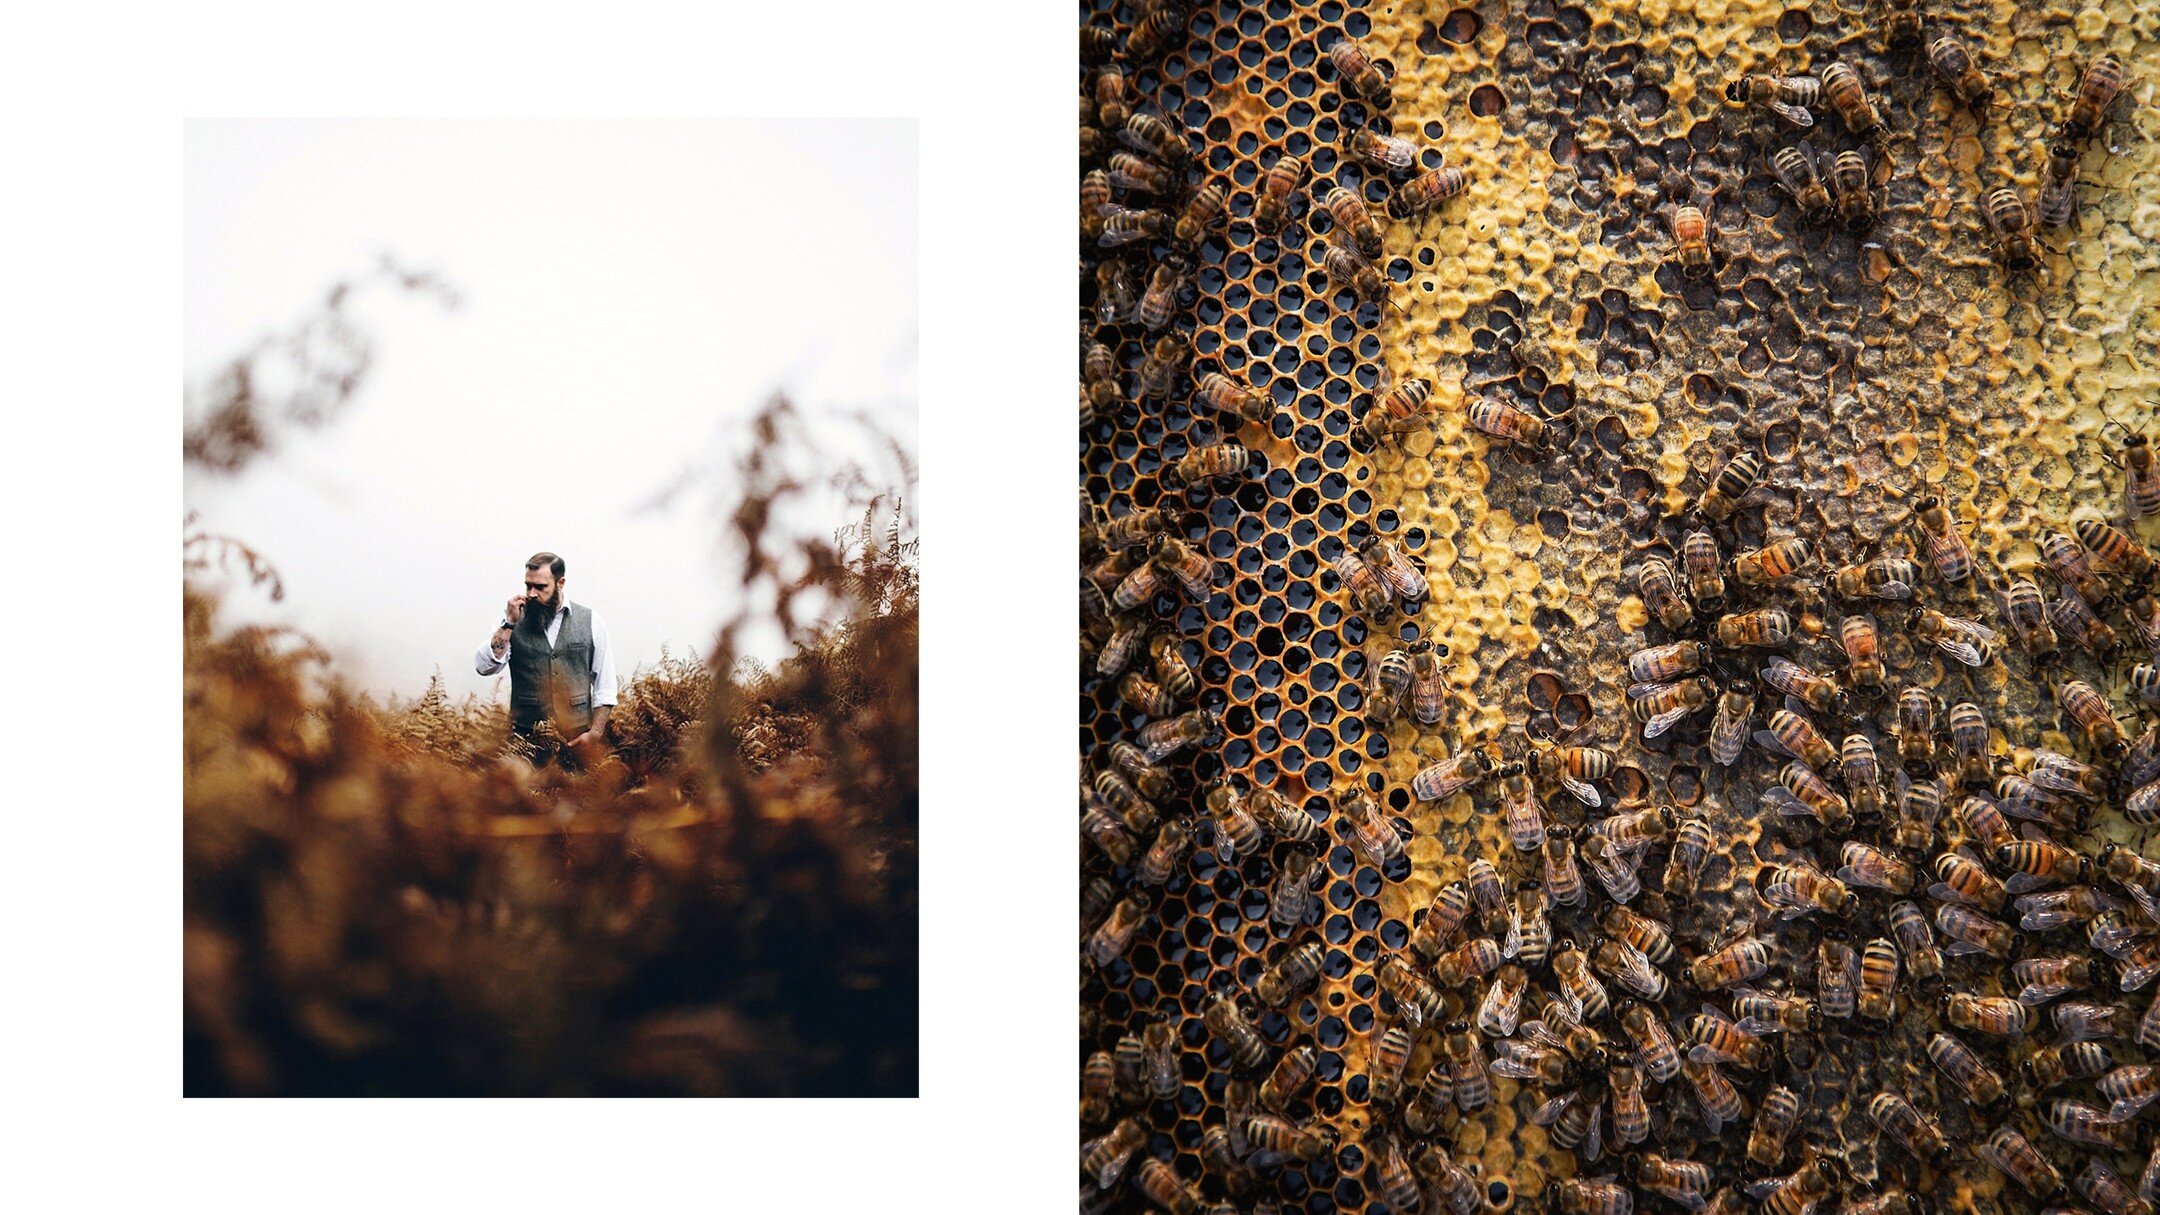 Busy bees at their honey making; and my dear friend and fellow photographer Craig George amongst the ferns in the Brecon Beacons. 

Bees are from our book, A Rising Tide and feature @canoecovehoney 
.
.
.
#PortfolioPages #portfolio #thisismyart #wwll